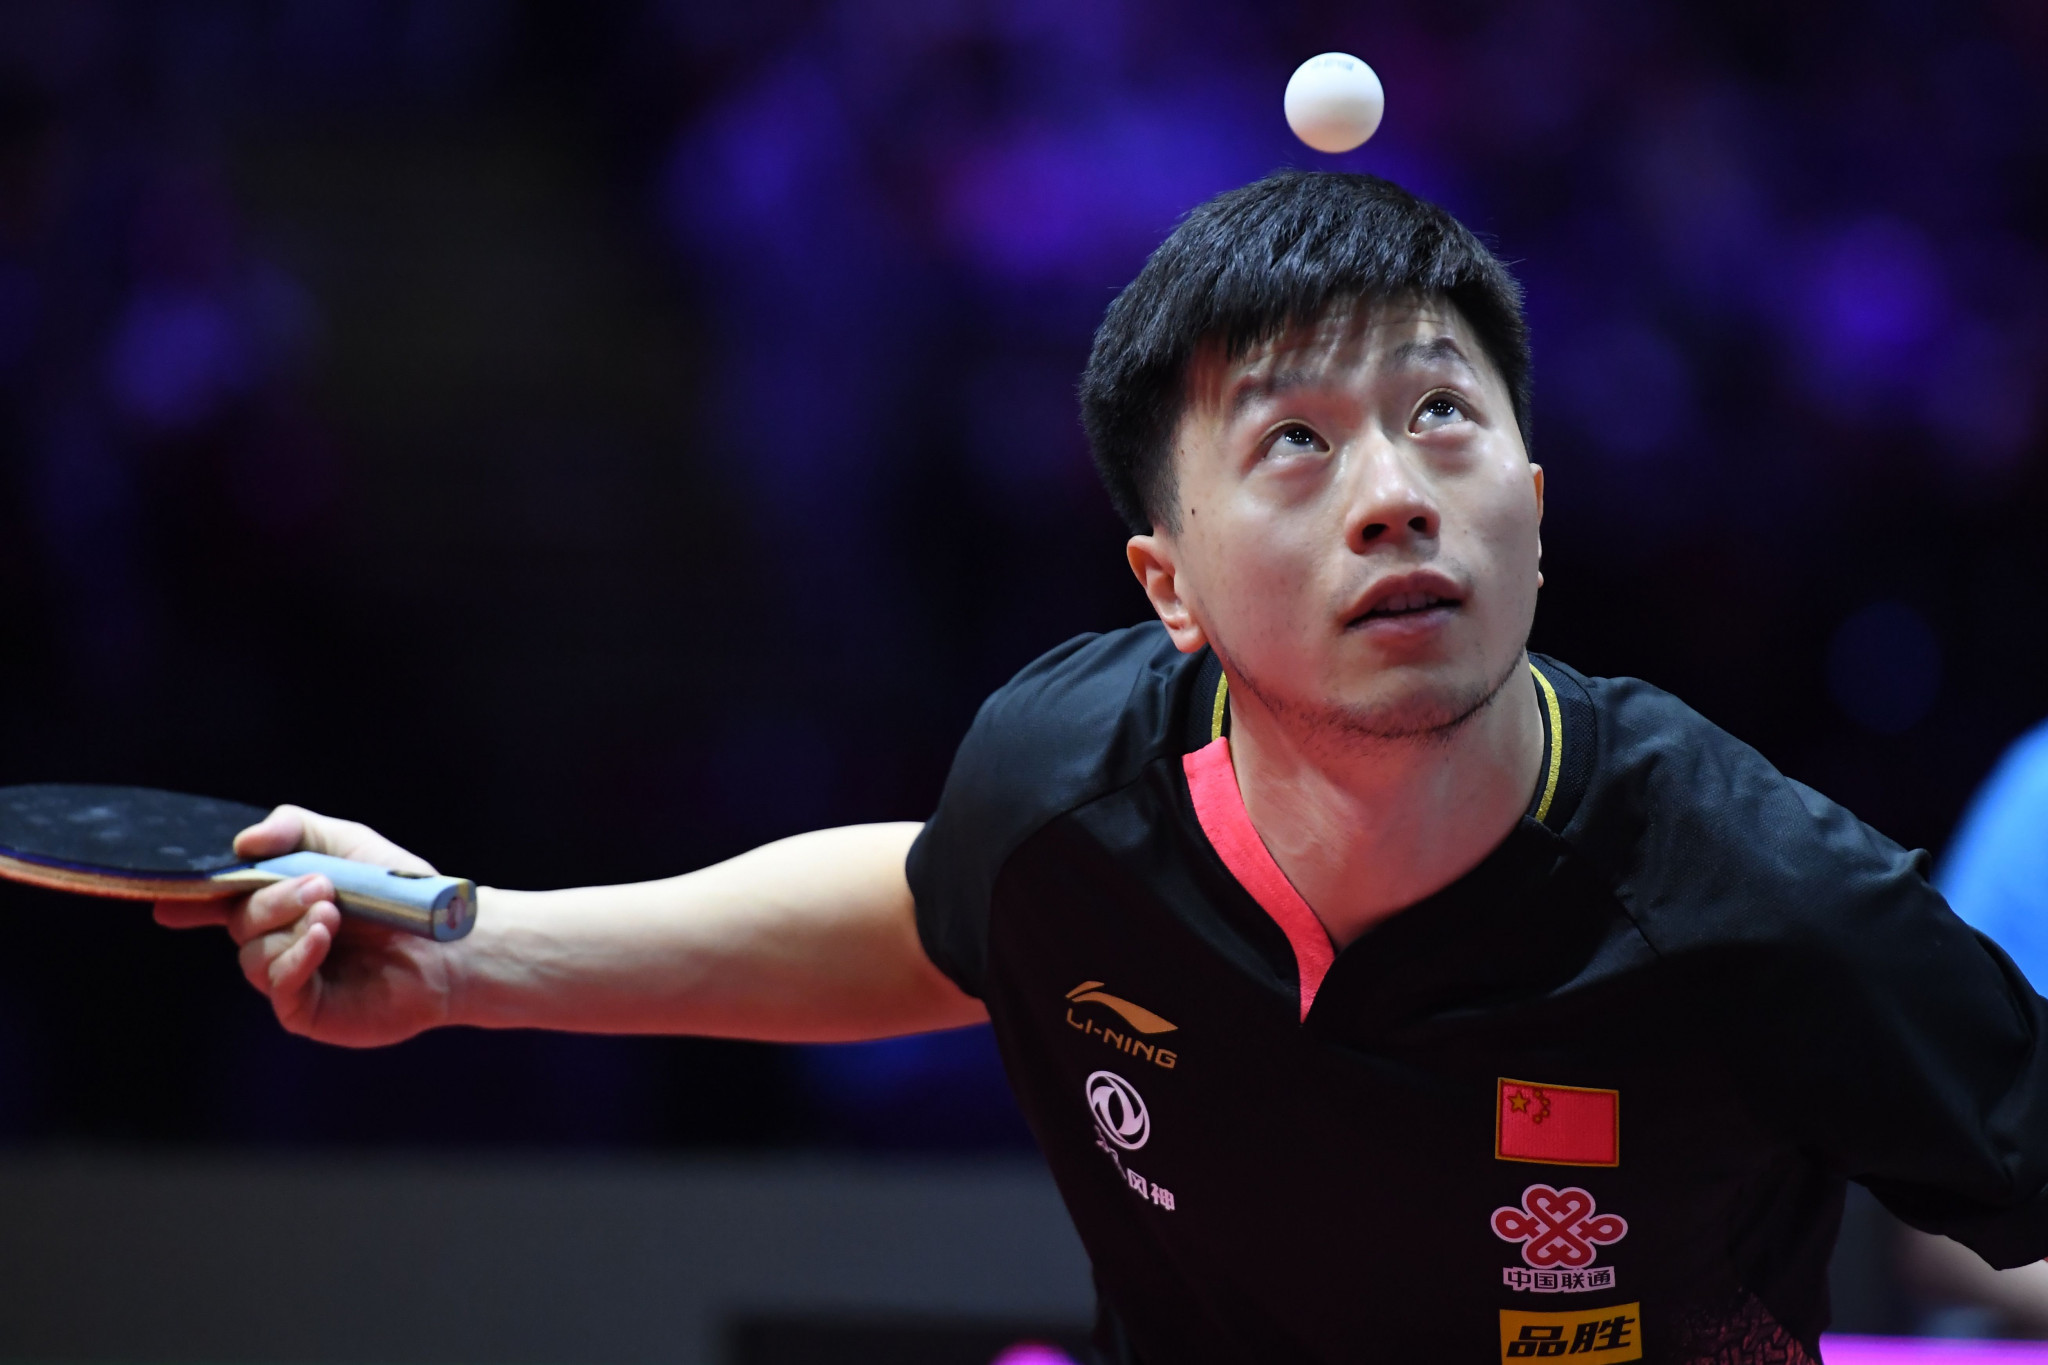 World champions Ma and Liu nominated for top prizes at 2019 ITTF Star Awards